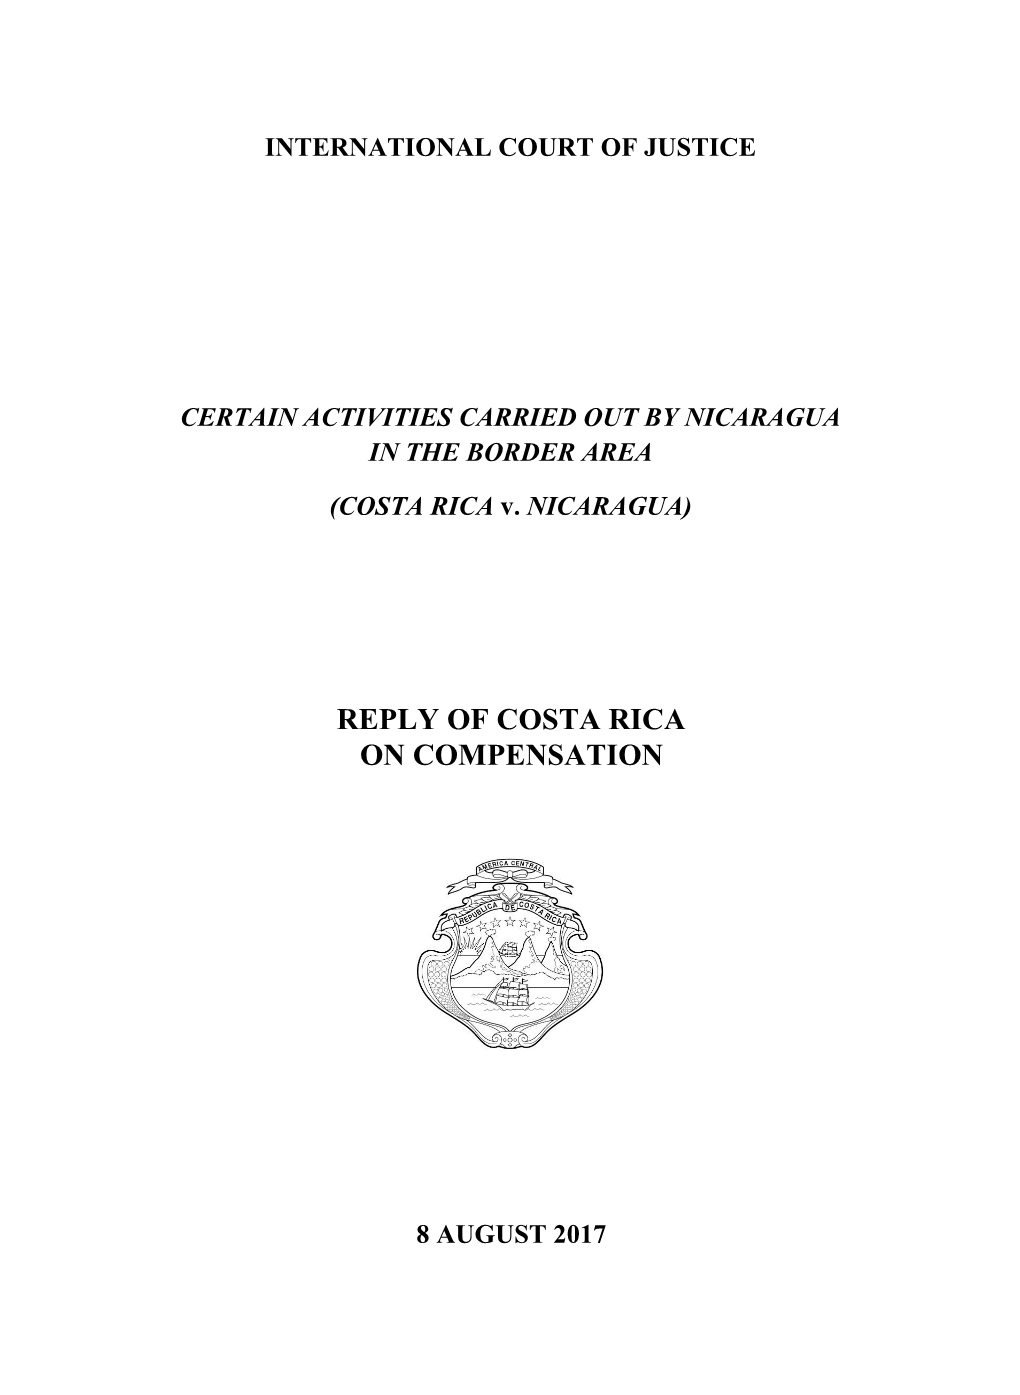 Reply of Costa Rica on Compensation